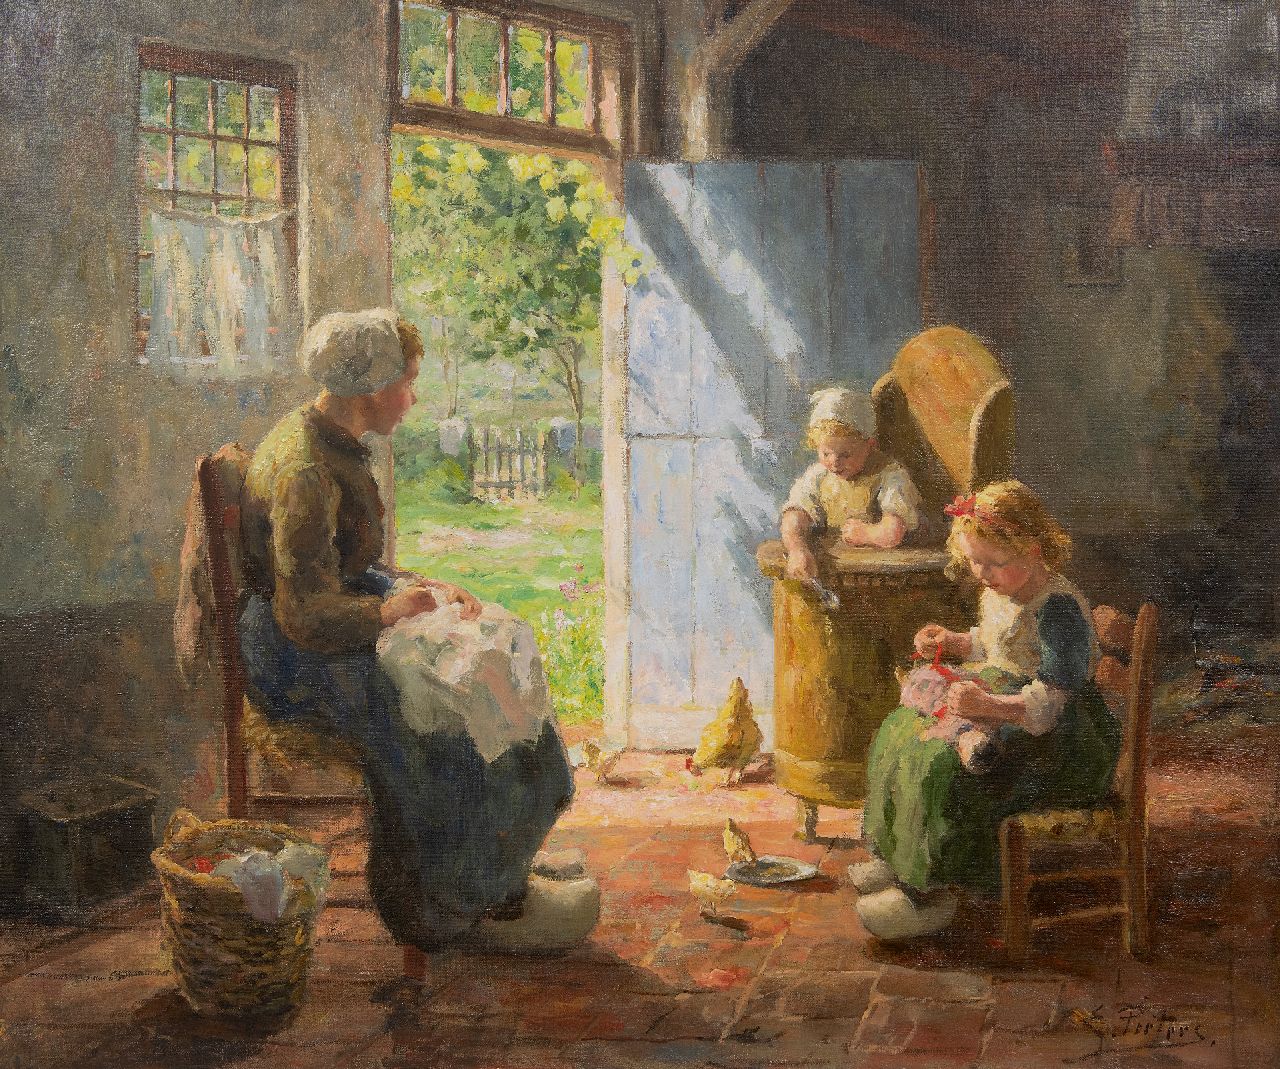 Pieters E.  | Evert Pieters | Paintings offered for sale | Sunny interior with mother and children, Laren, oil on canvas 68.1 x 81.2 cm, signed l.r.